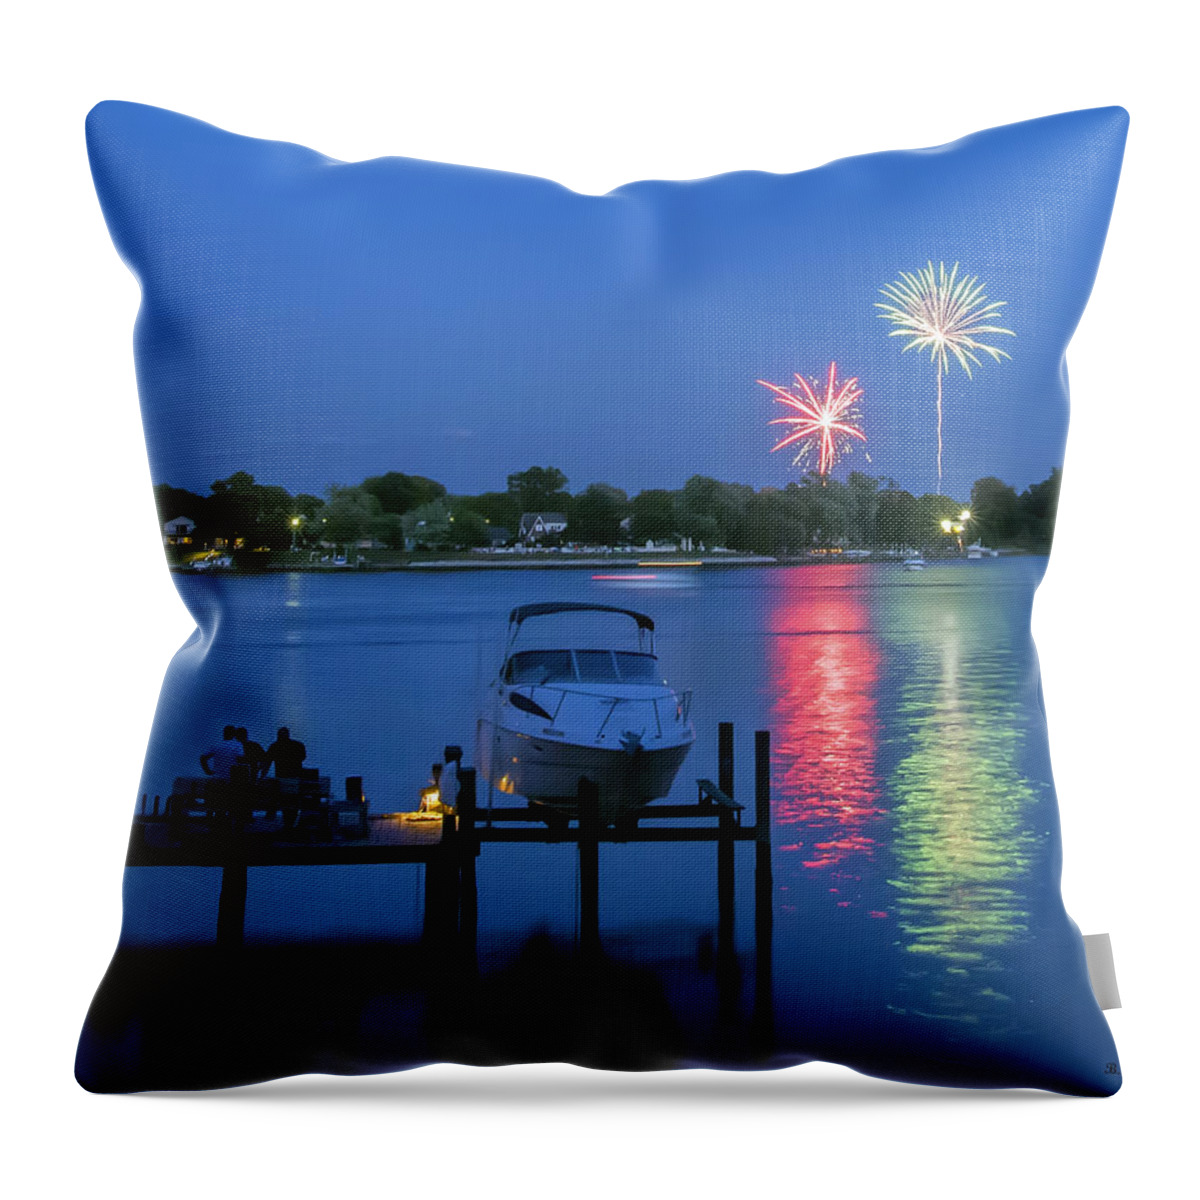 2d Throw Pillow featuring the photograph Fireworks Over Stony Creek by Brian Wallace